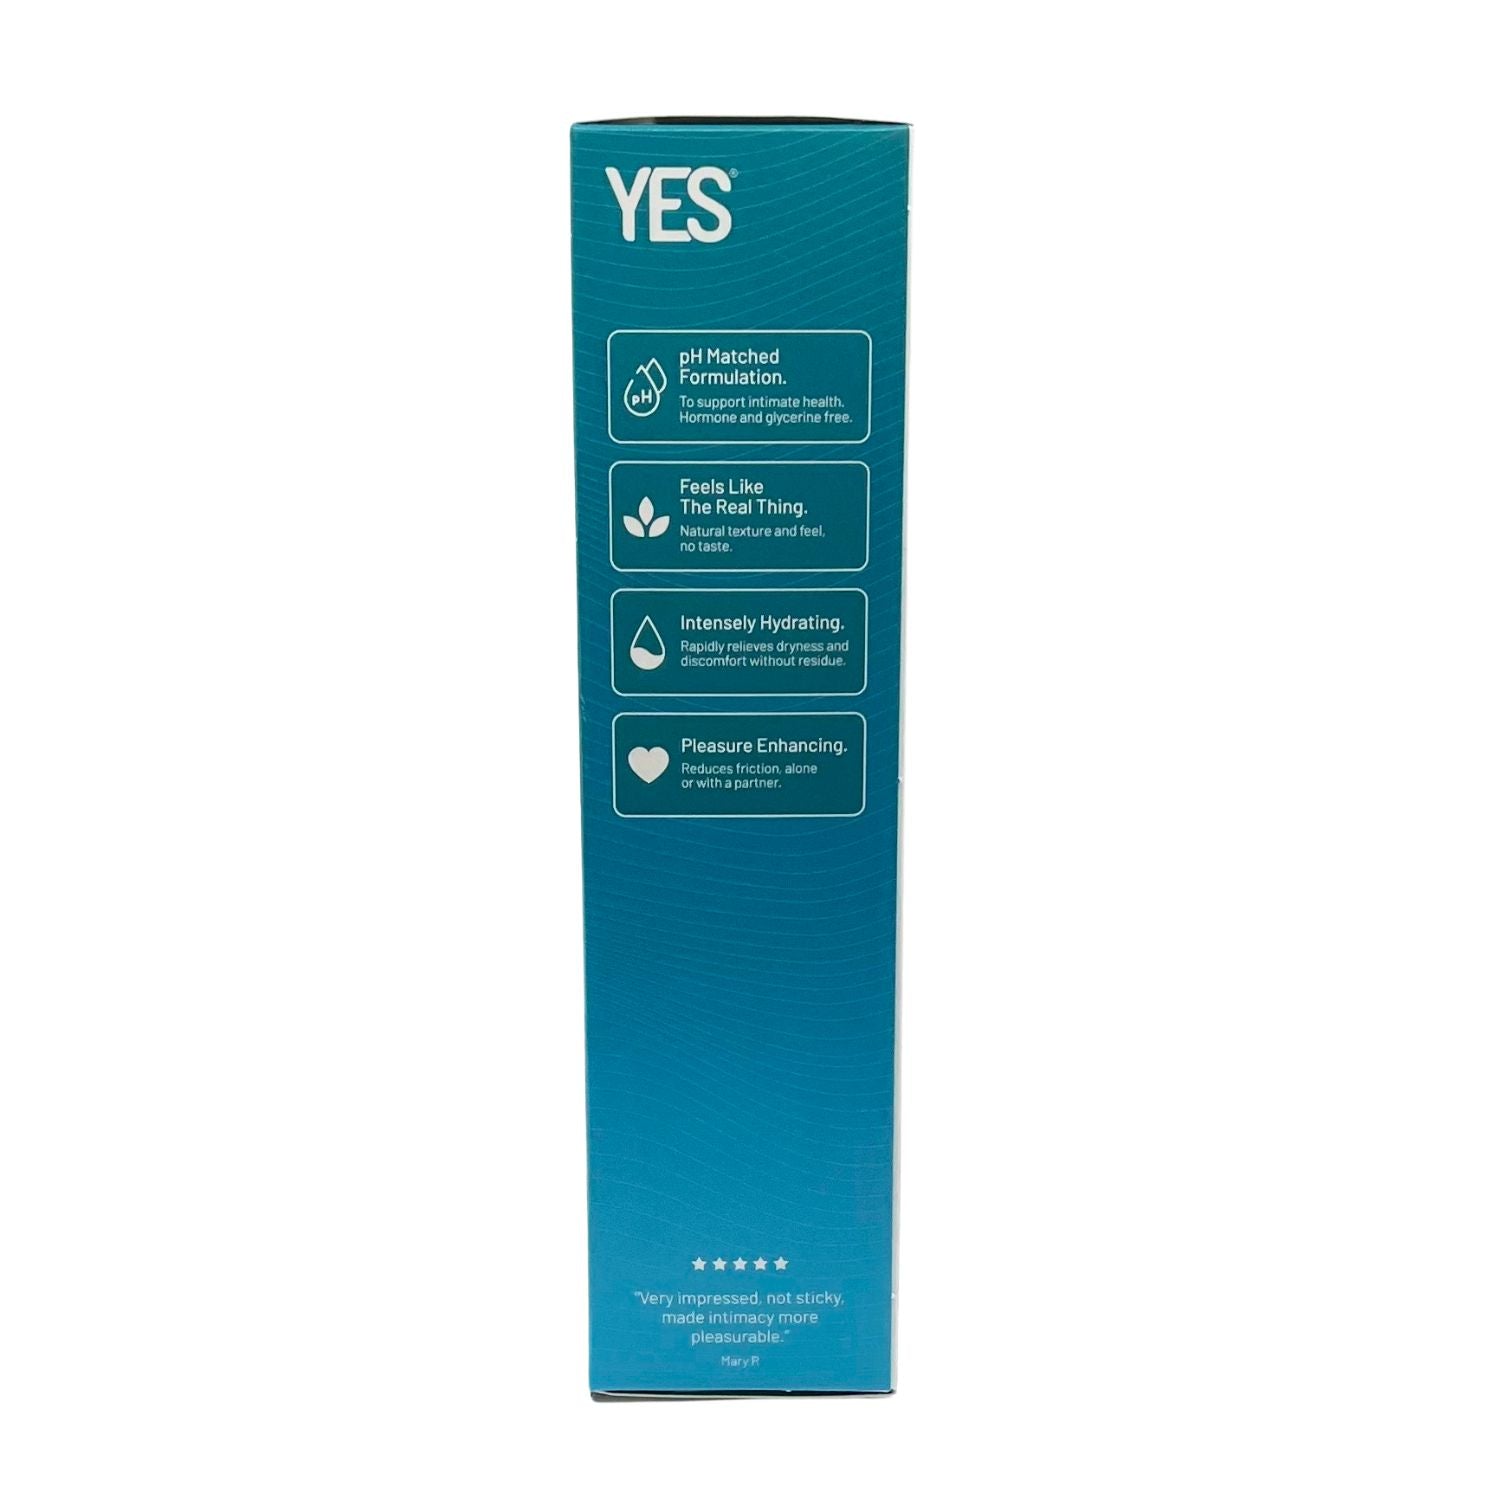 YES WATER BASED PERSONAL LUBRICANT